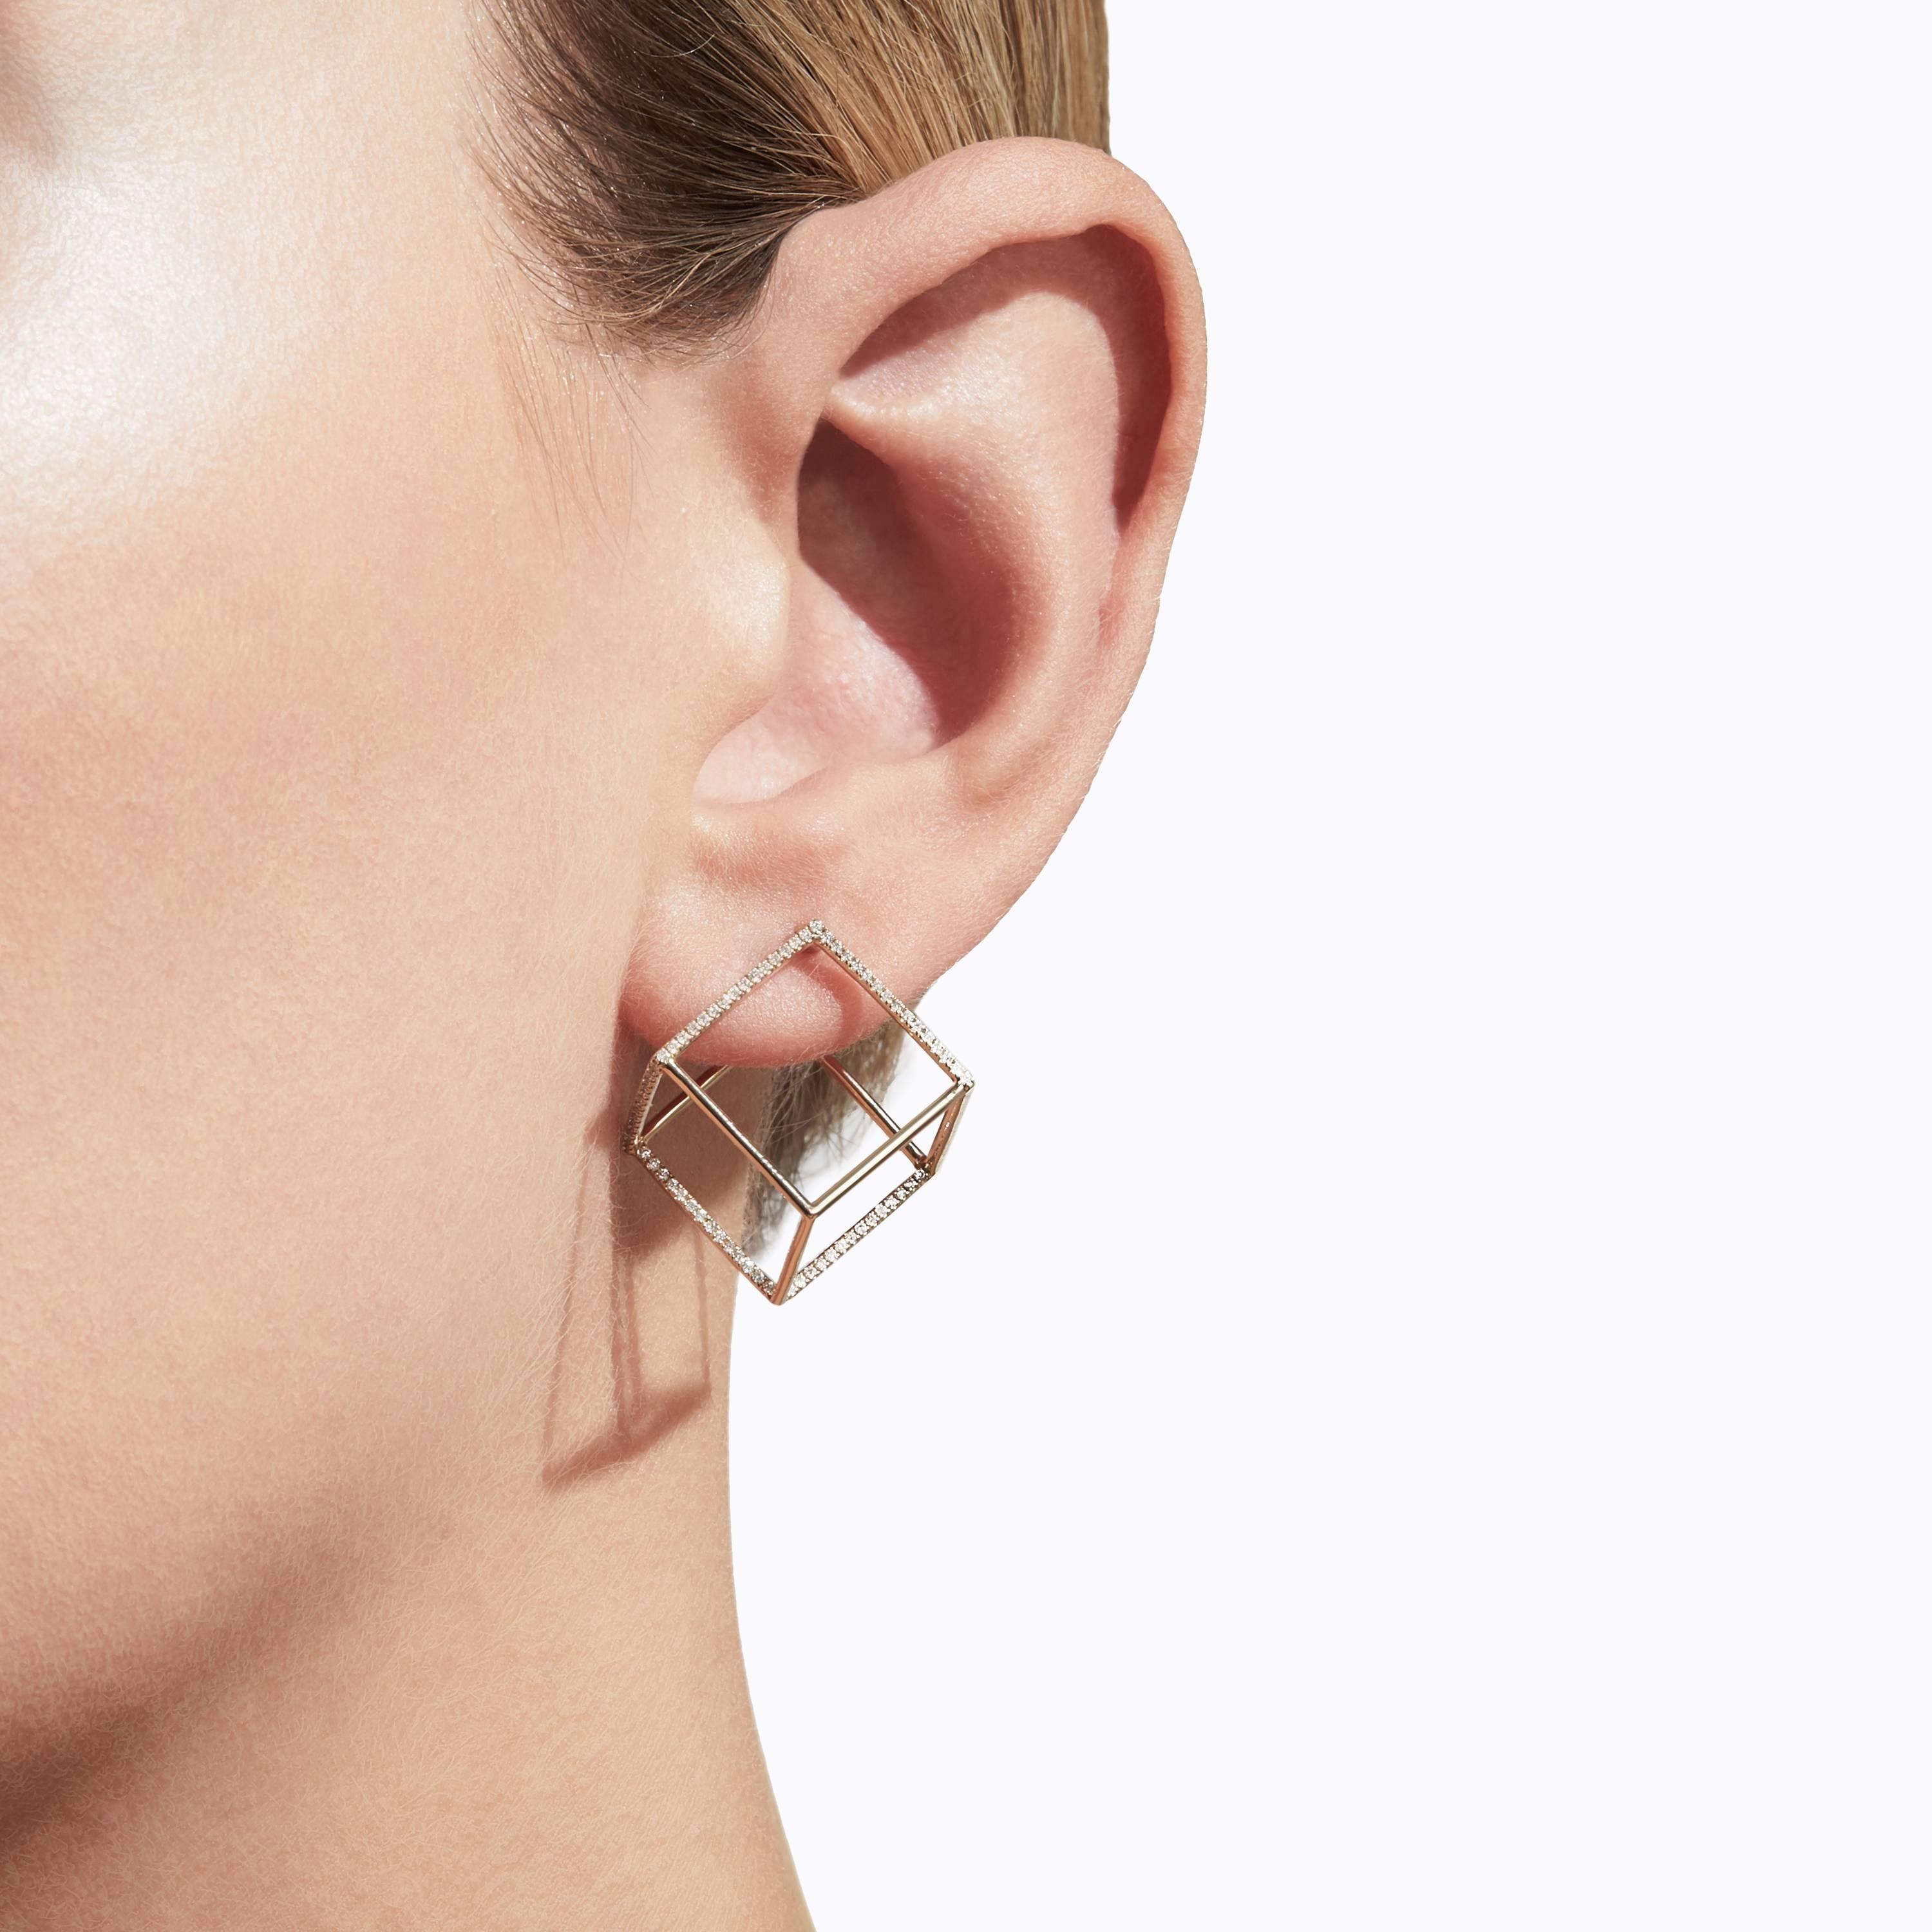 The three dimensional cubic form appears to float seamlessly around the earlobe when worn. One side is an earring post and six lines are set with micro diamonds creating a subtle but luxurious effect. You can alter the point at which the earring